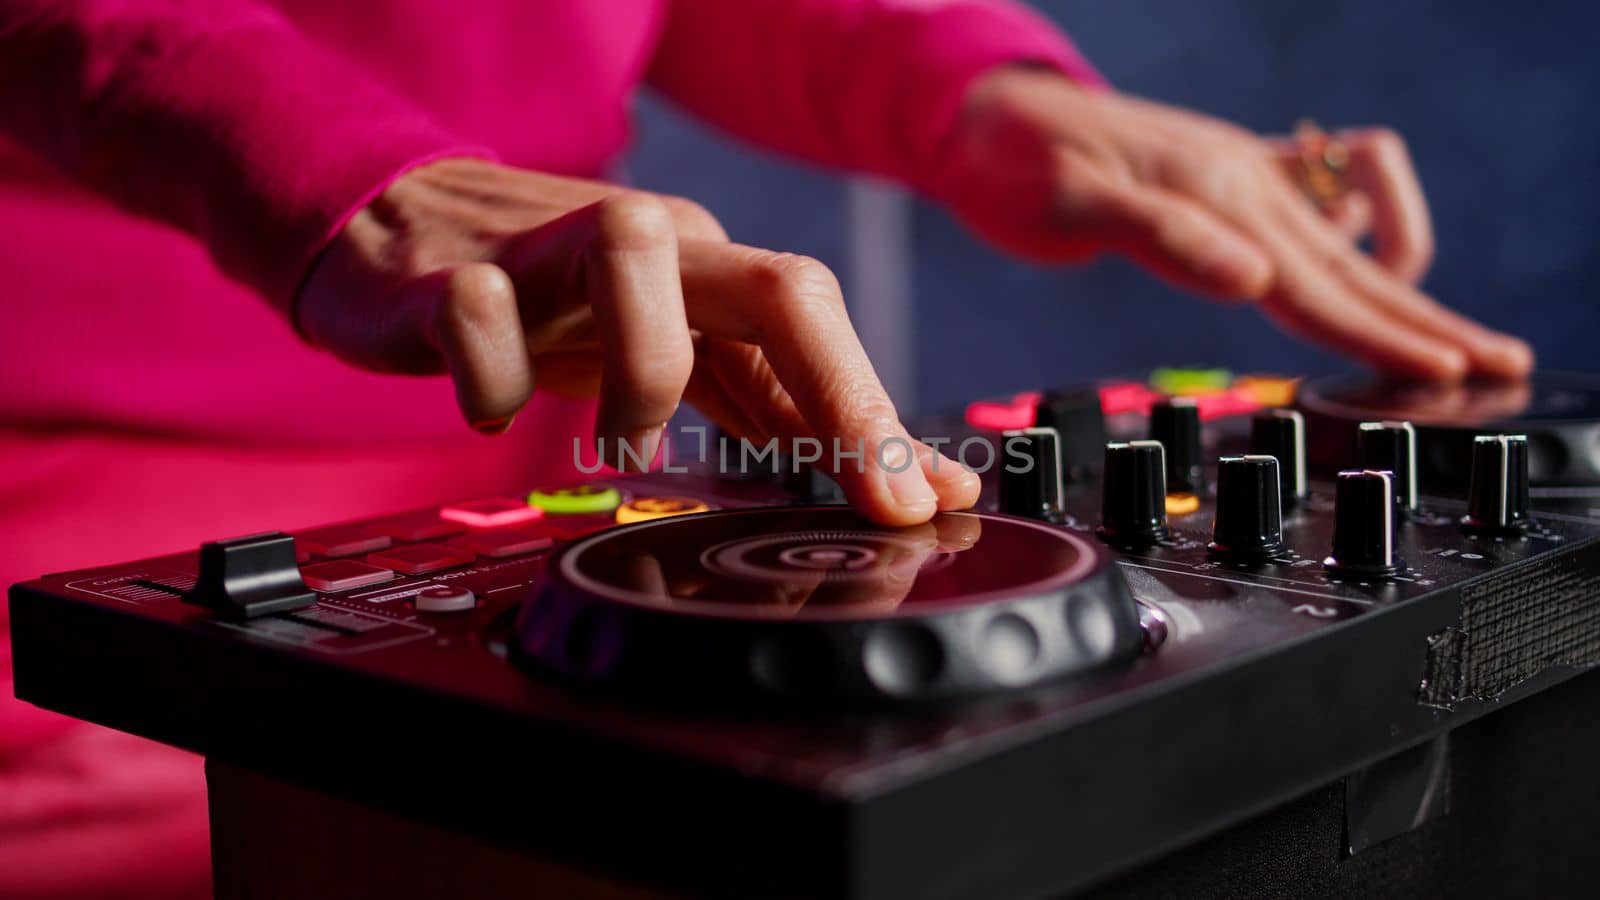 Musician standing at dj table mixing sound using professional mixer console, performing new album during night party in club. Artist enjoying playing music using audio equipment. Close up